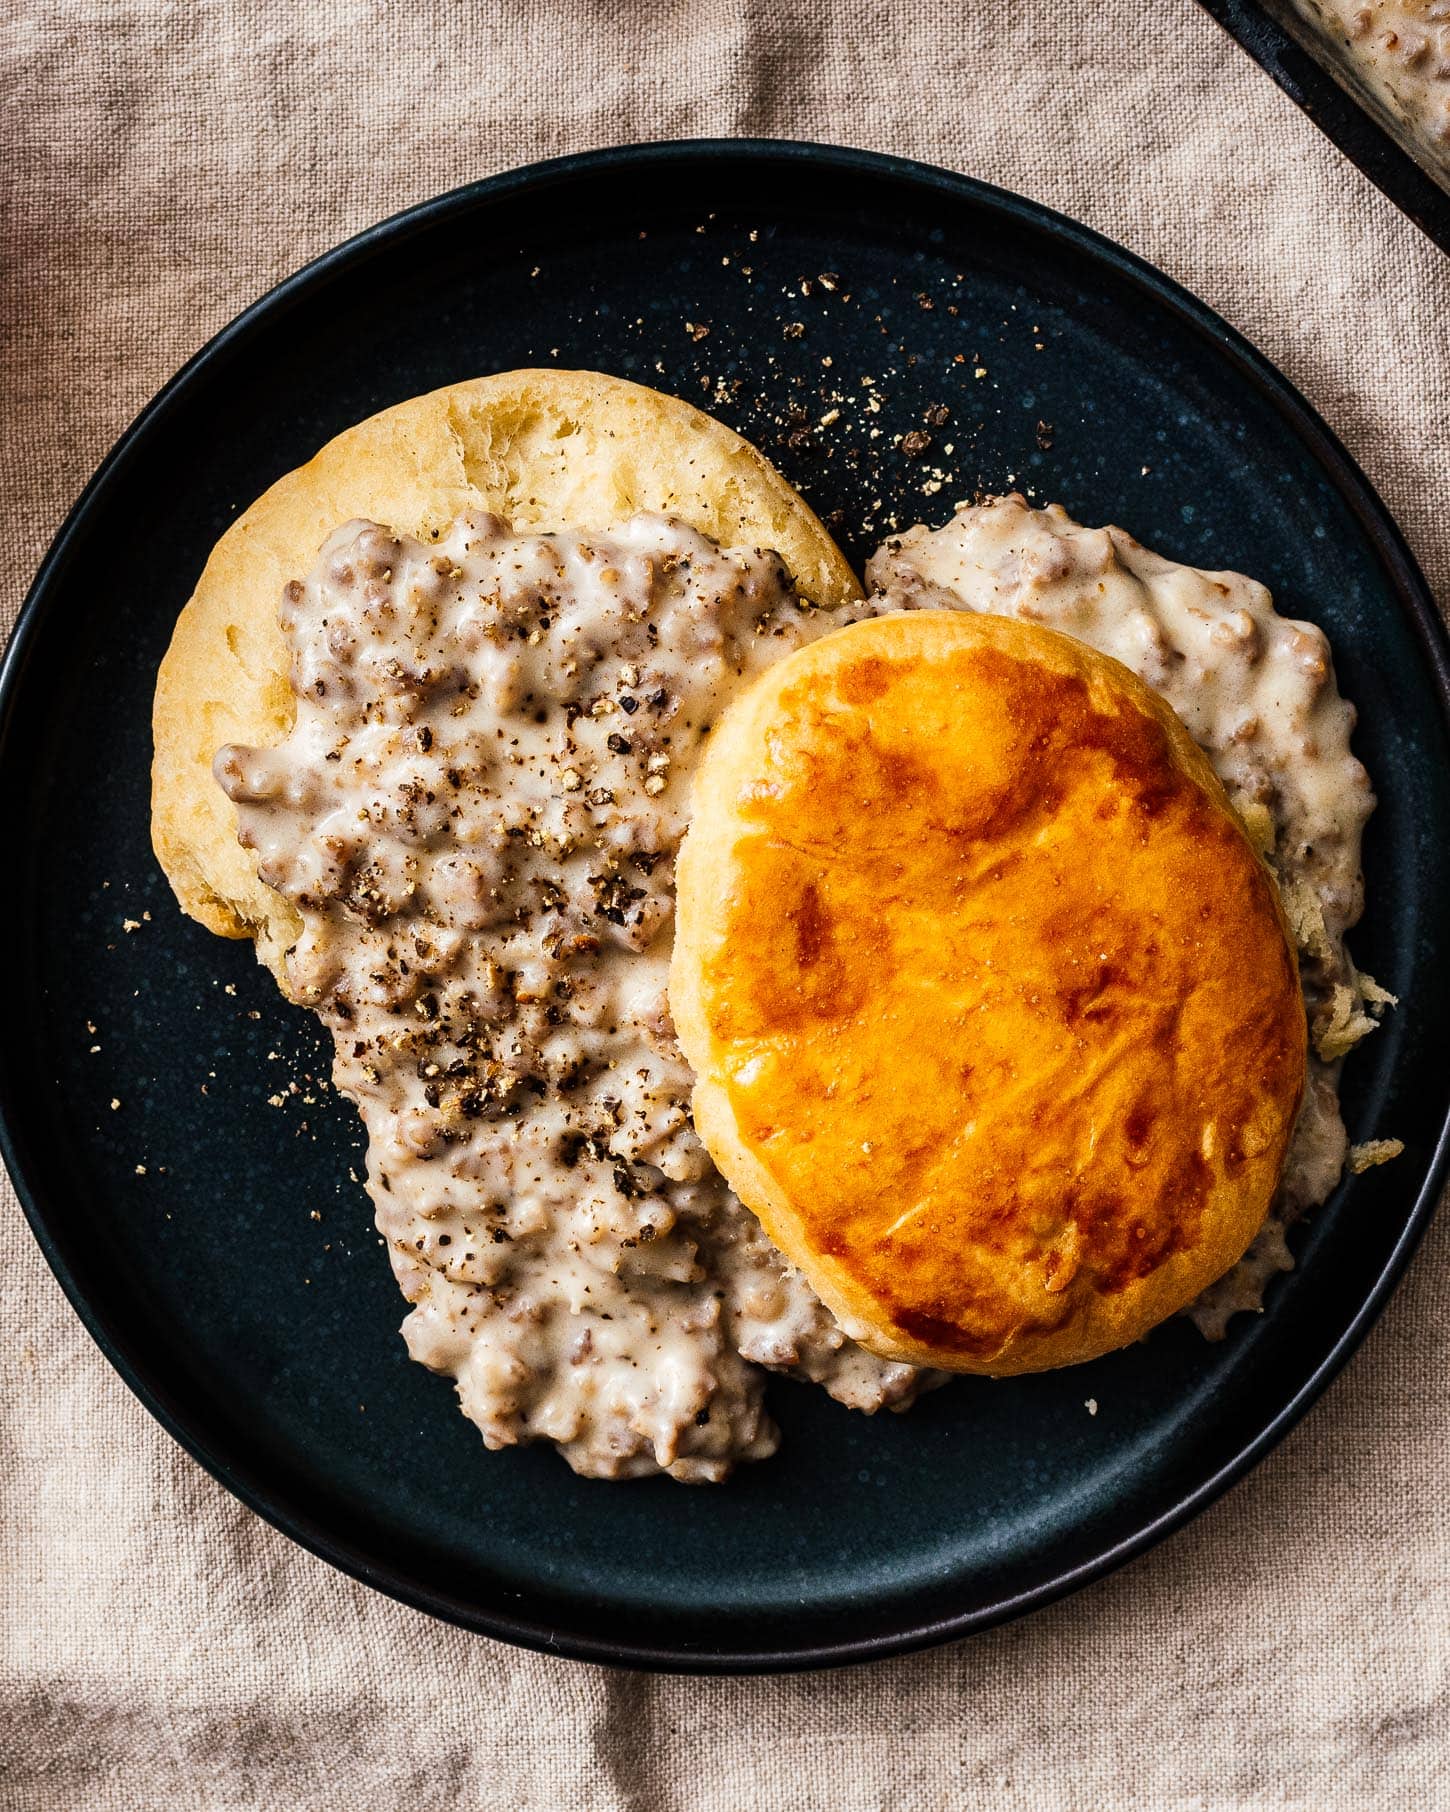 biscuits and sausage gravy | www.iamafoodblog.com